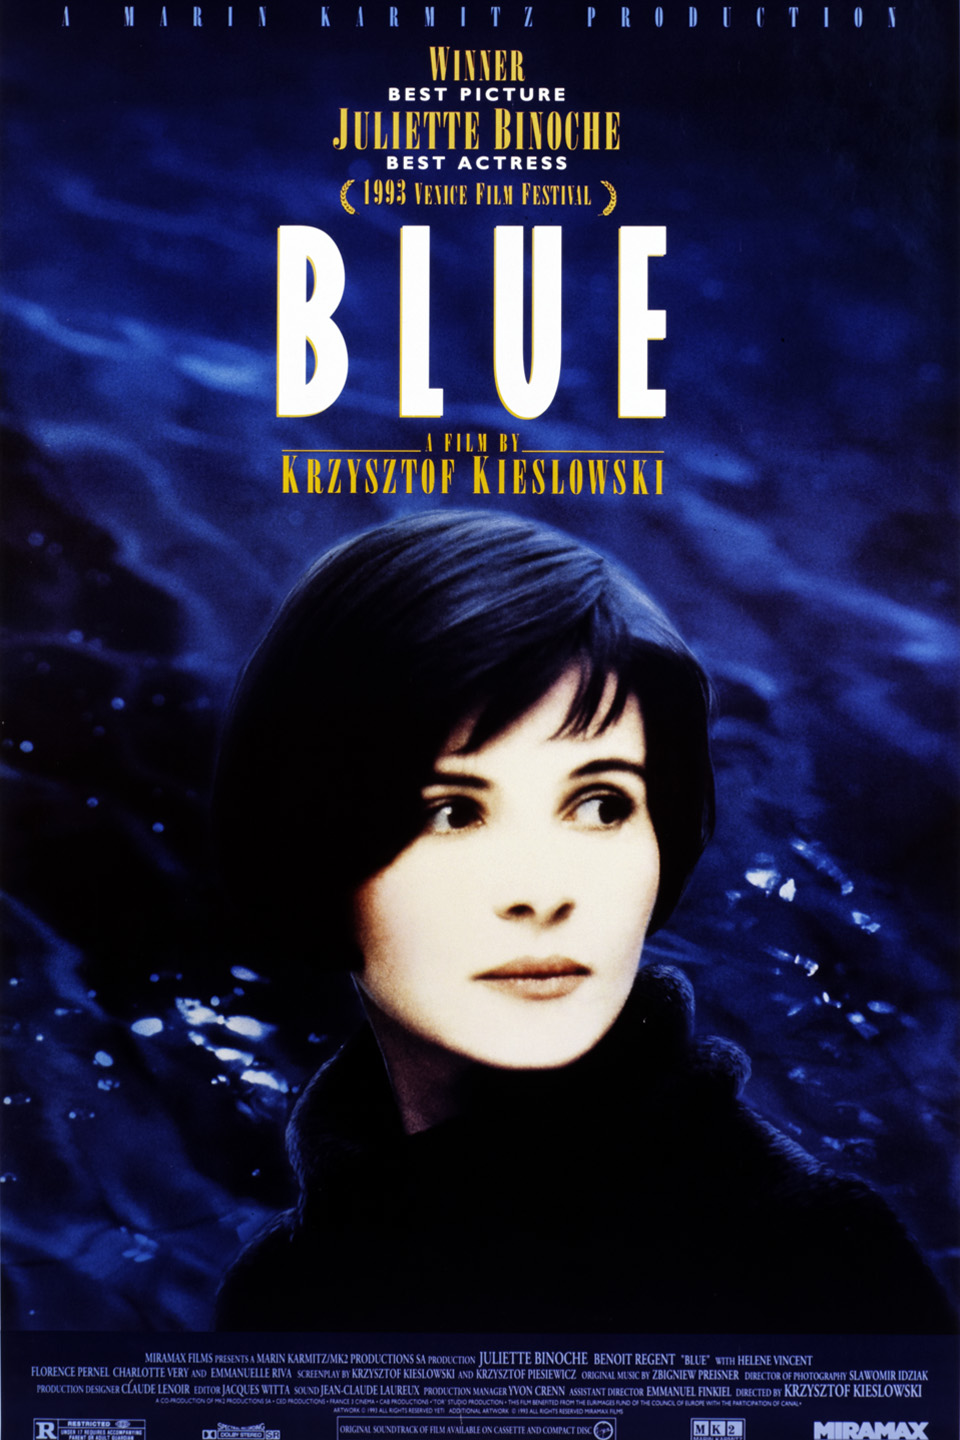 Film poster for THREE COLORS: BLUE (1993)